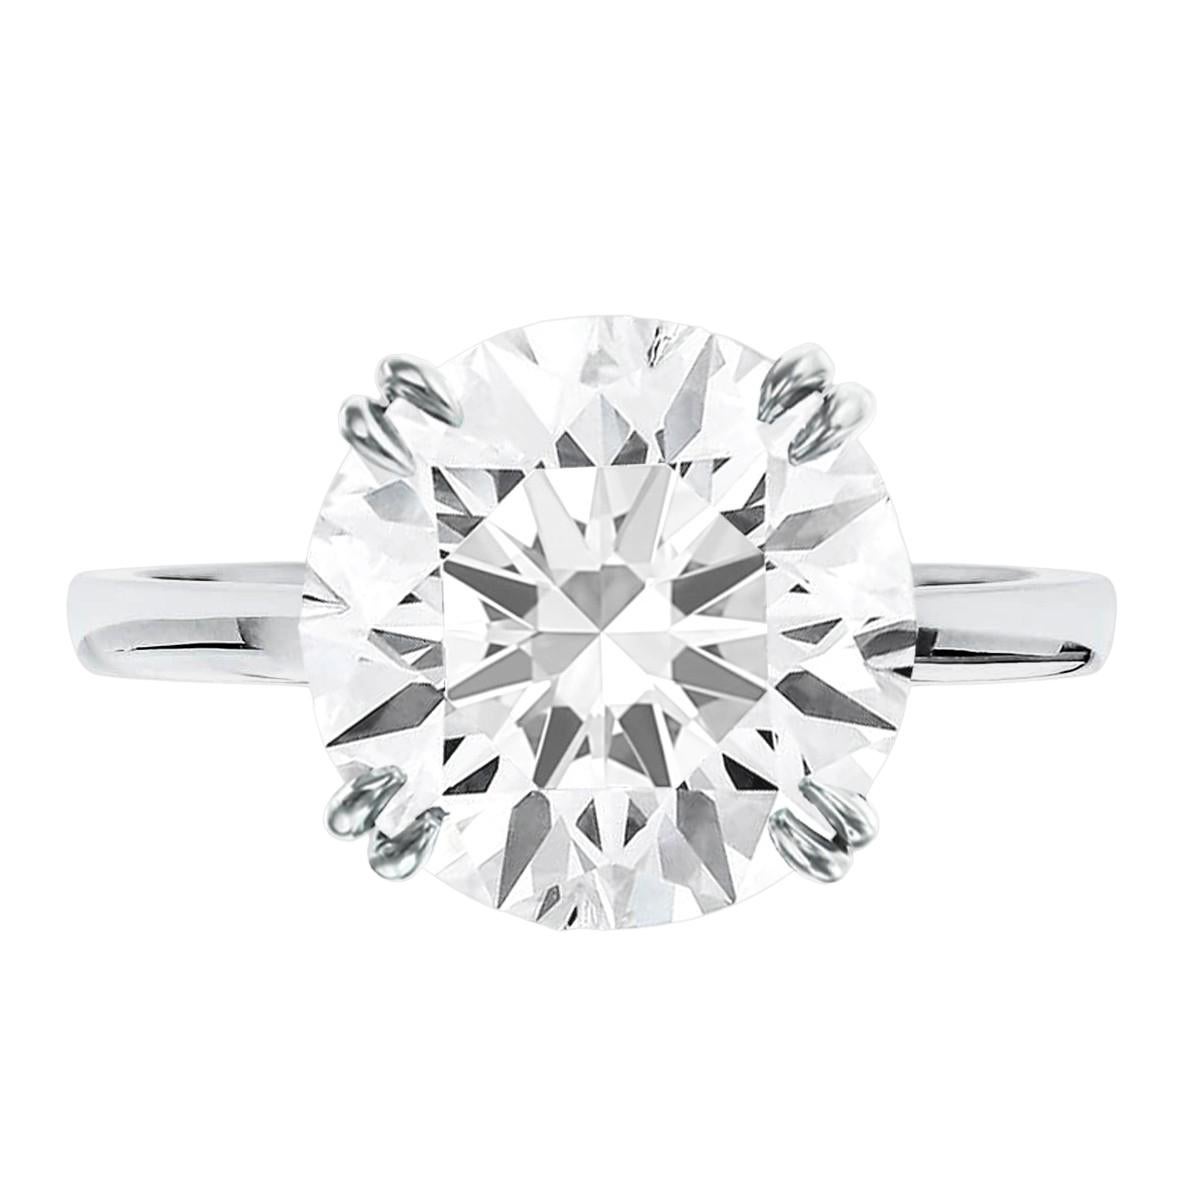 This exquisite ring boasts a dazzling round-cut diamond, certified by the Gemological Institute of America (GIA). The diamond, weighing an impressive 3 carats, showcases a captivating F color grade, indicating a near-colorless gem. Its clarity is